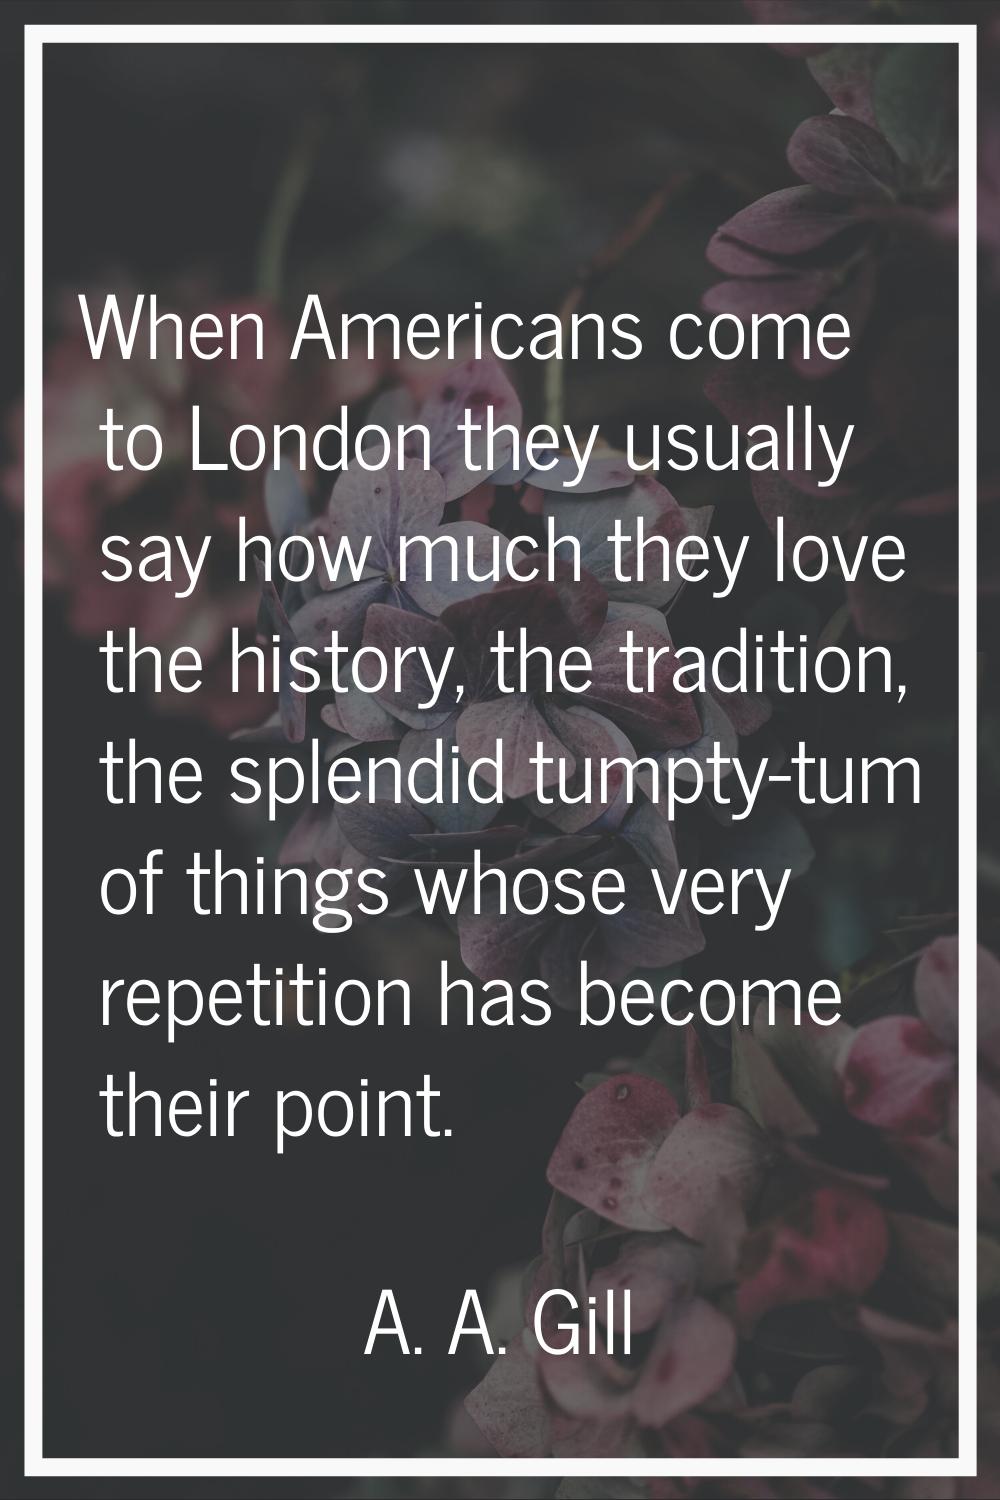 When Americans come to London they usually say how much they love the history, the tradition, the s